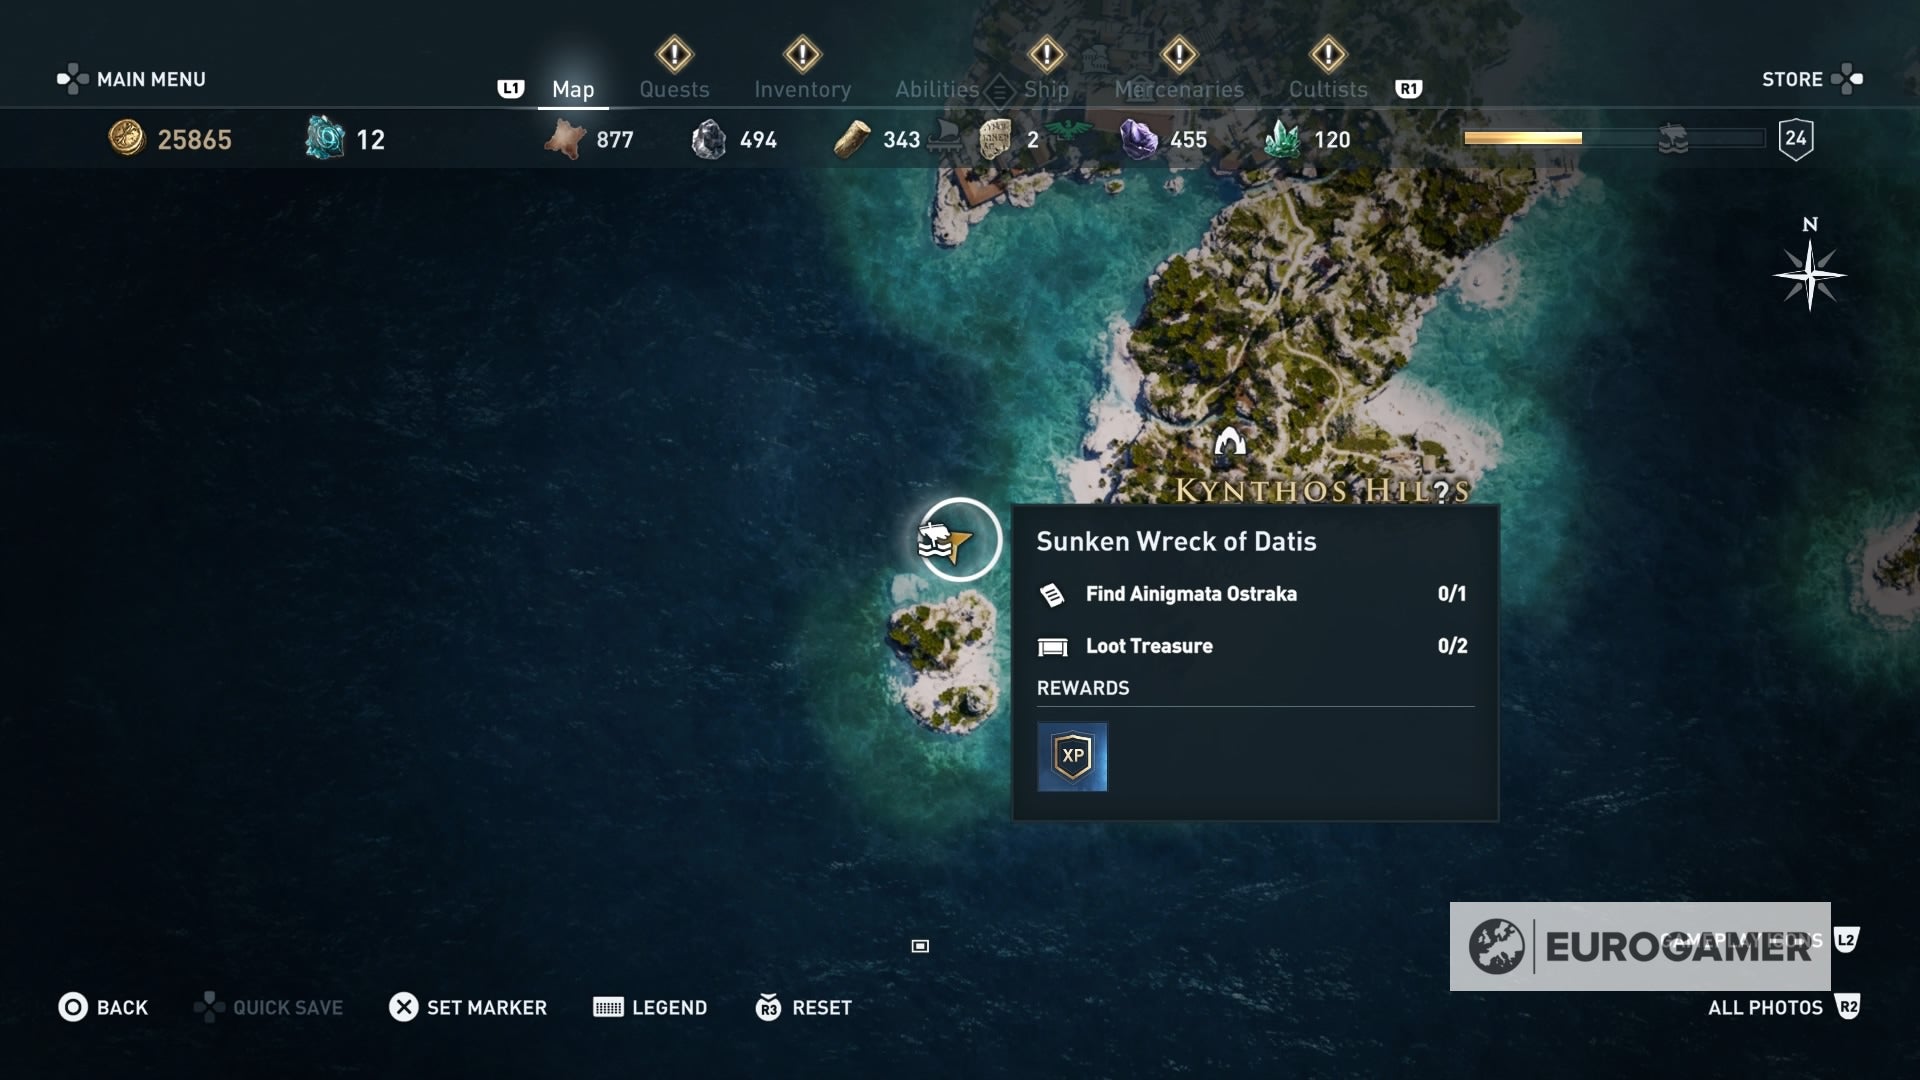 Assassin's Creed Odyssey - Needle in a Haystack, Grave Discovery riddle solutions and where to the Sunken Wreck Datis, Kynthos Ruins tablets |